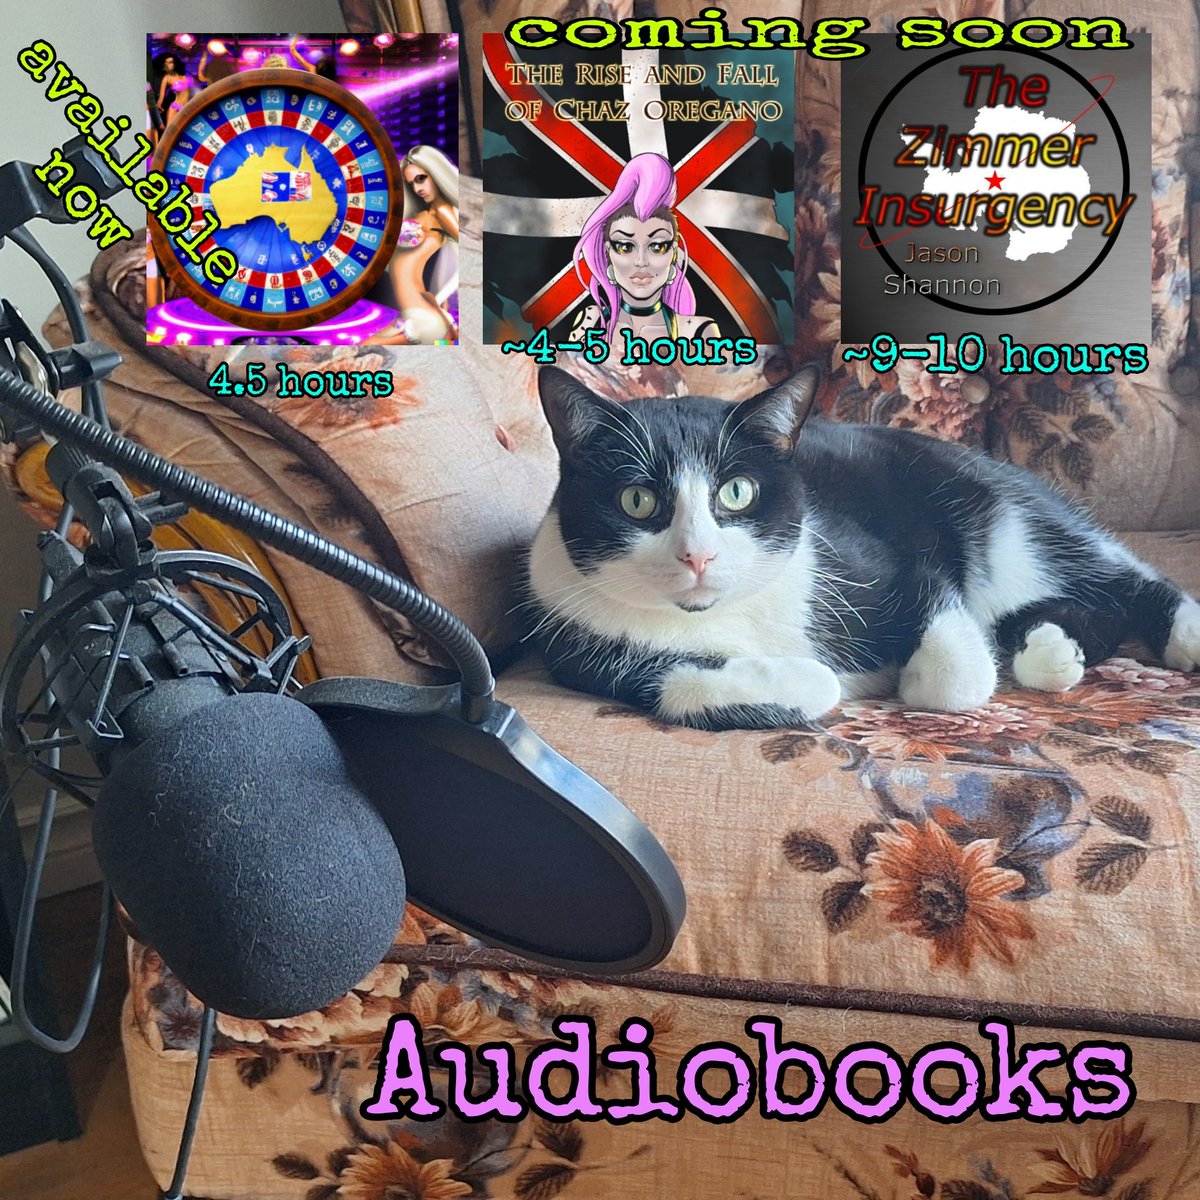 Looking for a #highoctane #scifi #audiobook 

Go to website/audio for links

#IndieSciFi

#IndieSF

#ScienceFictionBooks

#IndieAuthors

#SpeculativeFiction

#SciFiReads

#IndieBooks

#SciFiNovels

#IndieAuthorCommunity

#CatsOfX

#femaleprotagonist

#lgbtqfiction